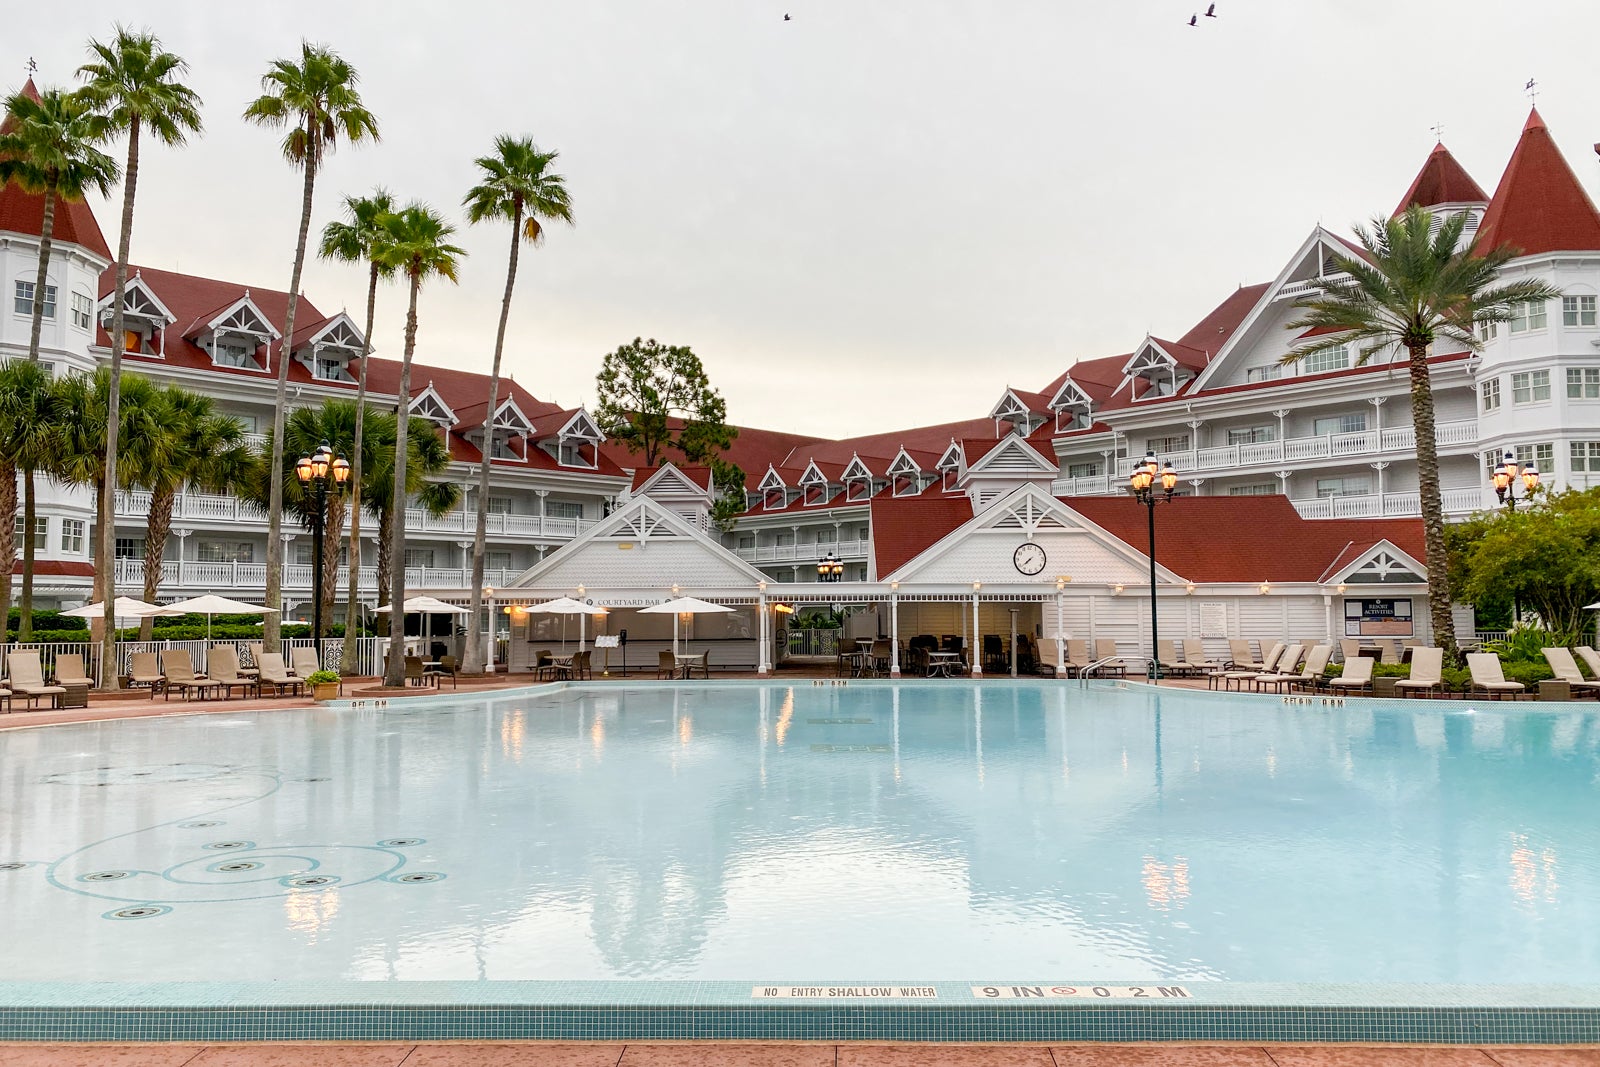 6 things to know before you decide if staying at Disney's Grand Floridian Resort is right for you - The Points Guy